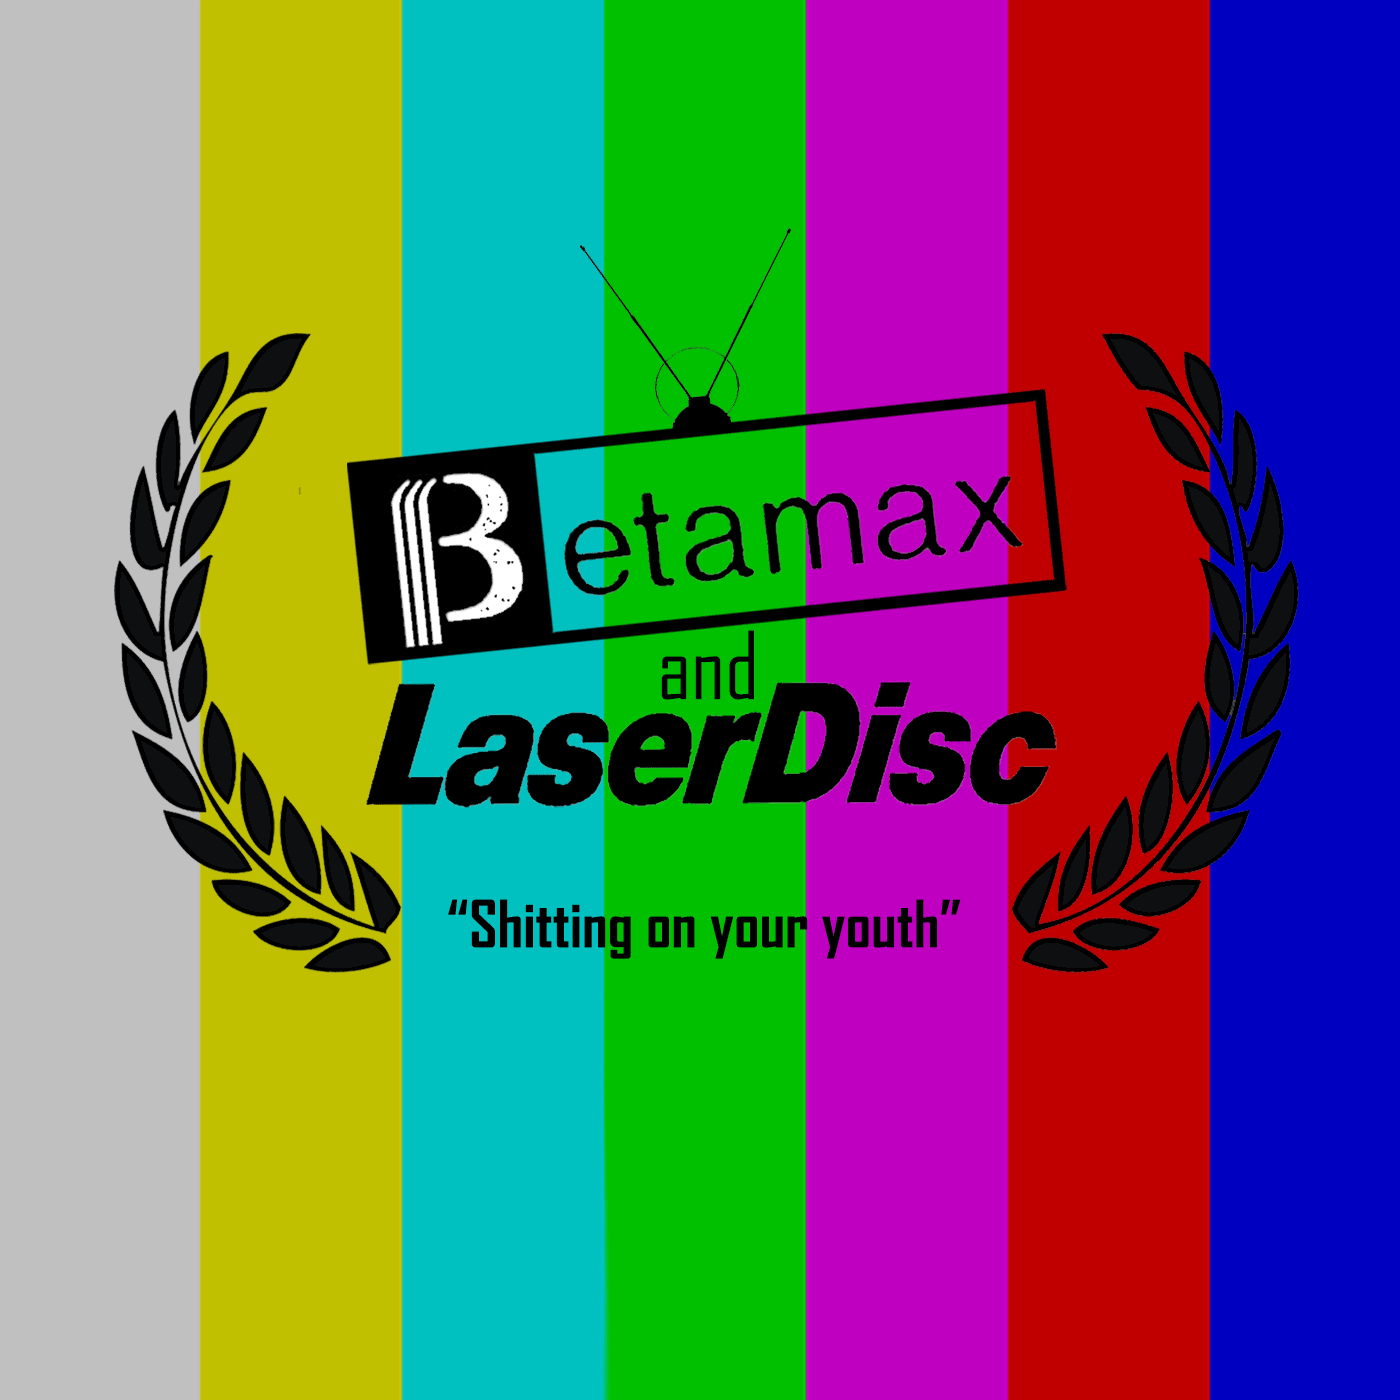 Betamax & Laserdisc #6 | The Television & Film Podcast from The Unheard Nerd